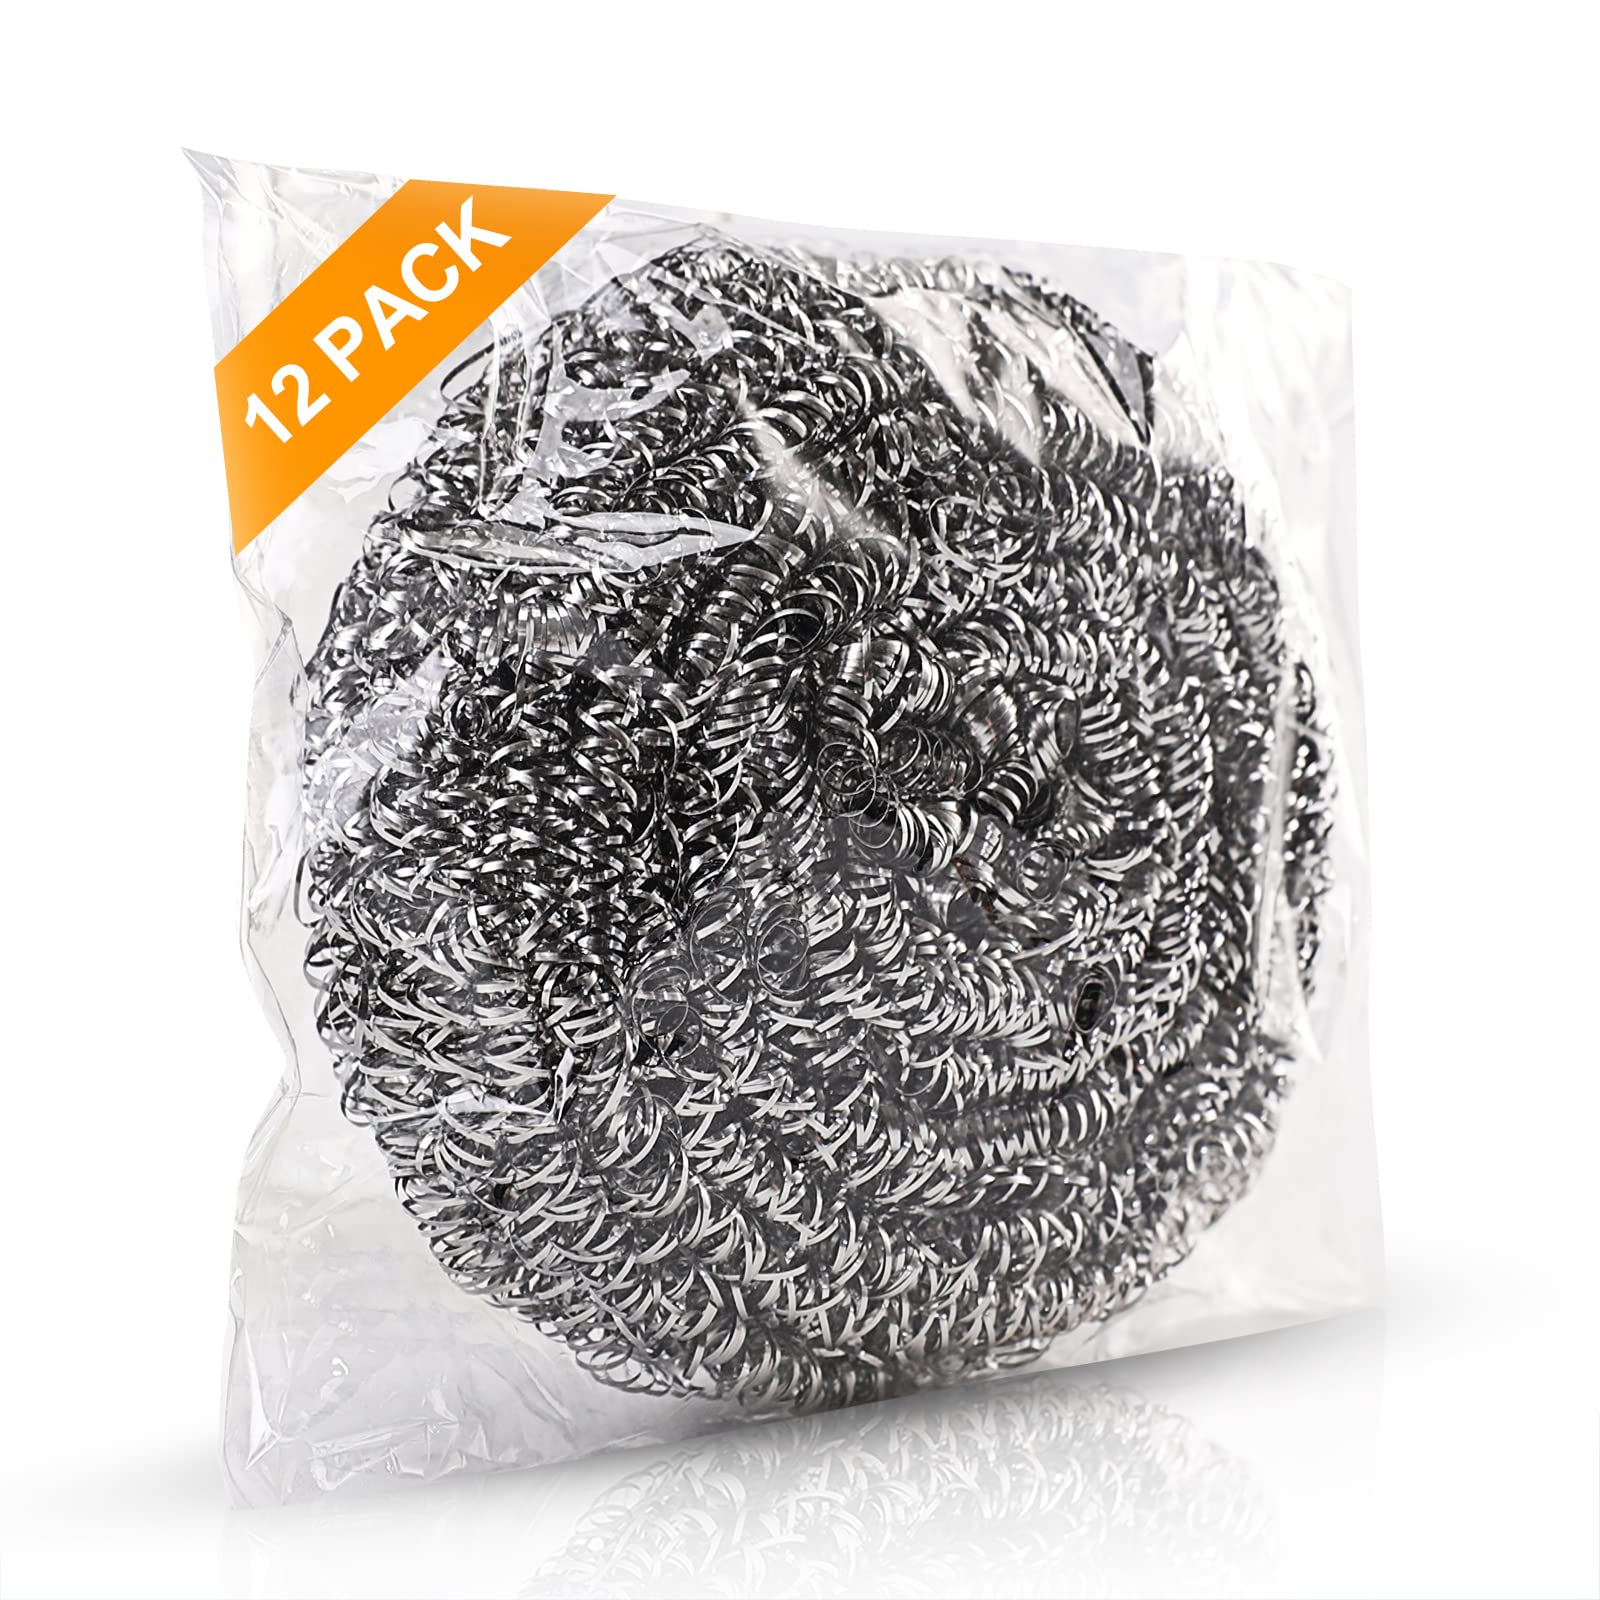 12Pack Upgraded Steel Wool Scrubbers by ovwo - Premium Stainless Steel  Scrubber, Metal Scouring Pads, Steel Wool Pads, Kitchen Cleaner, Heavy Duty  Cleaning Supplies - Especially for Tough Cleaning